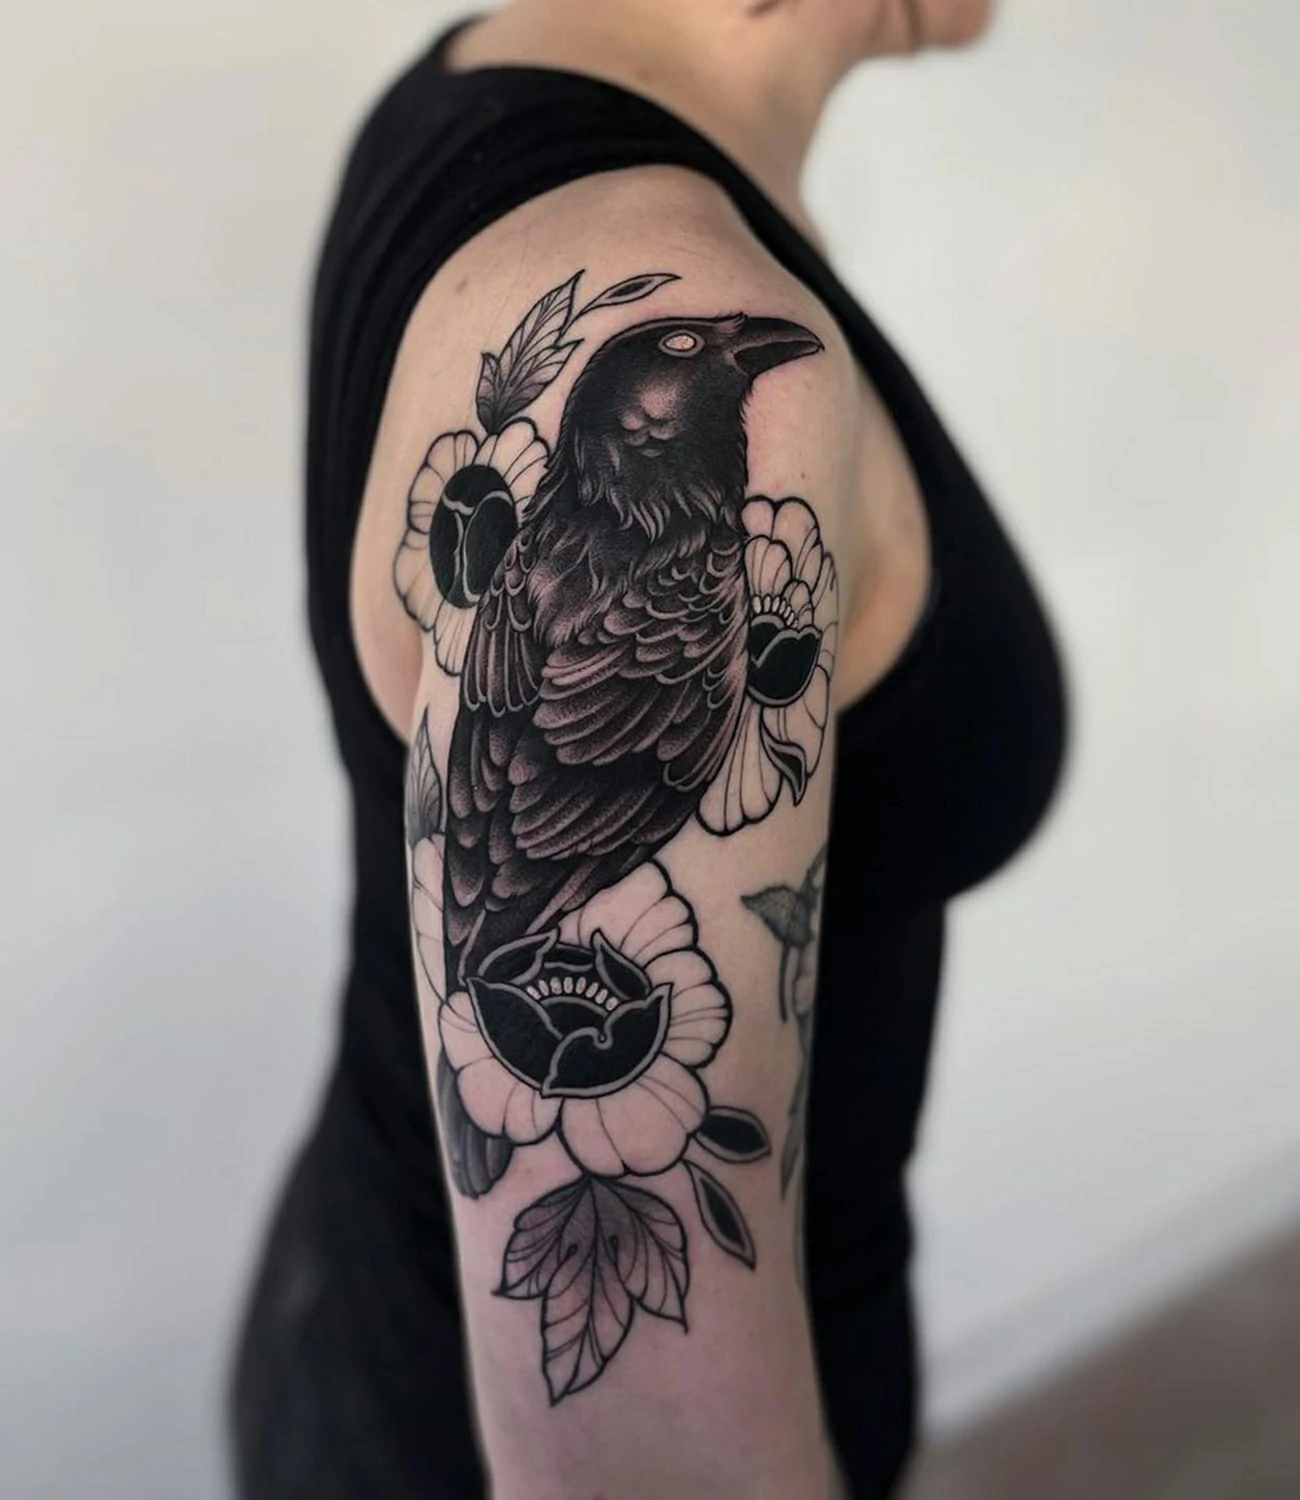 Black raven tattoo: A classic raven tattoo rendered entirely in black ink.